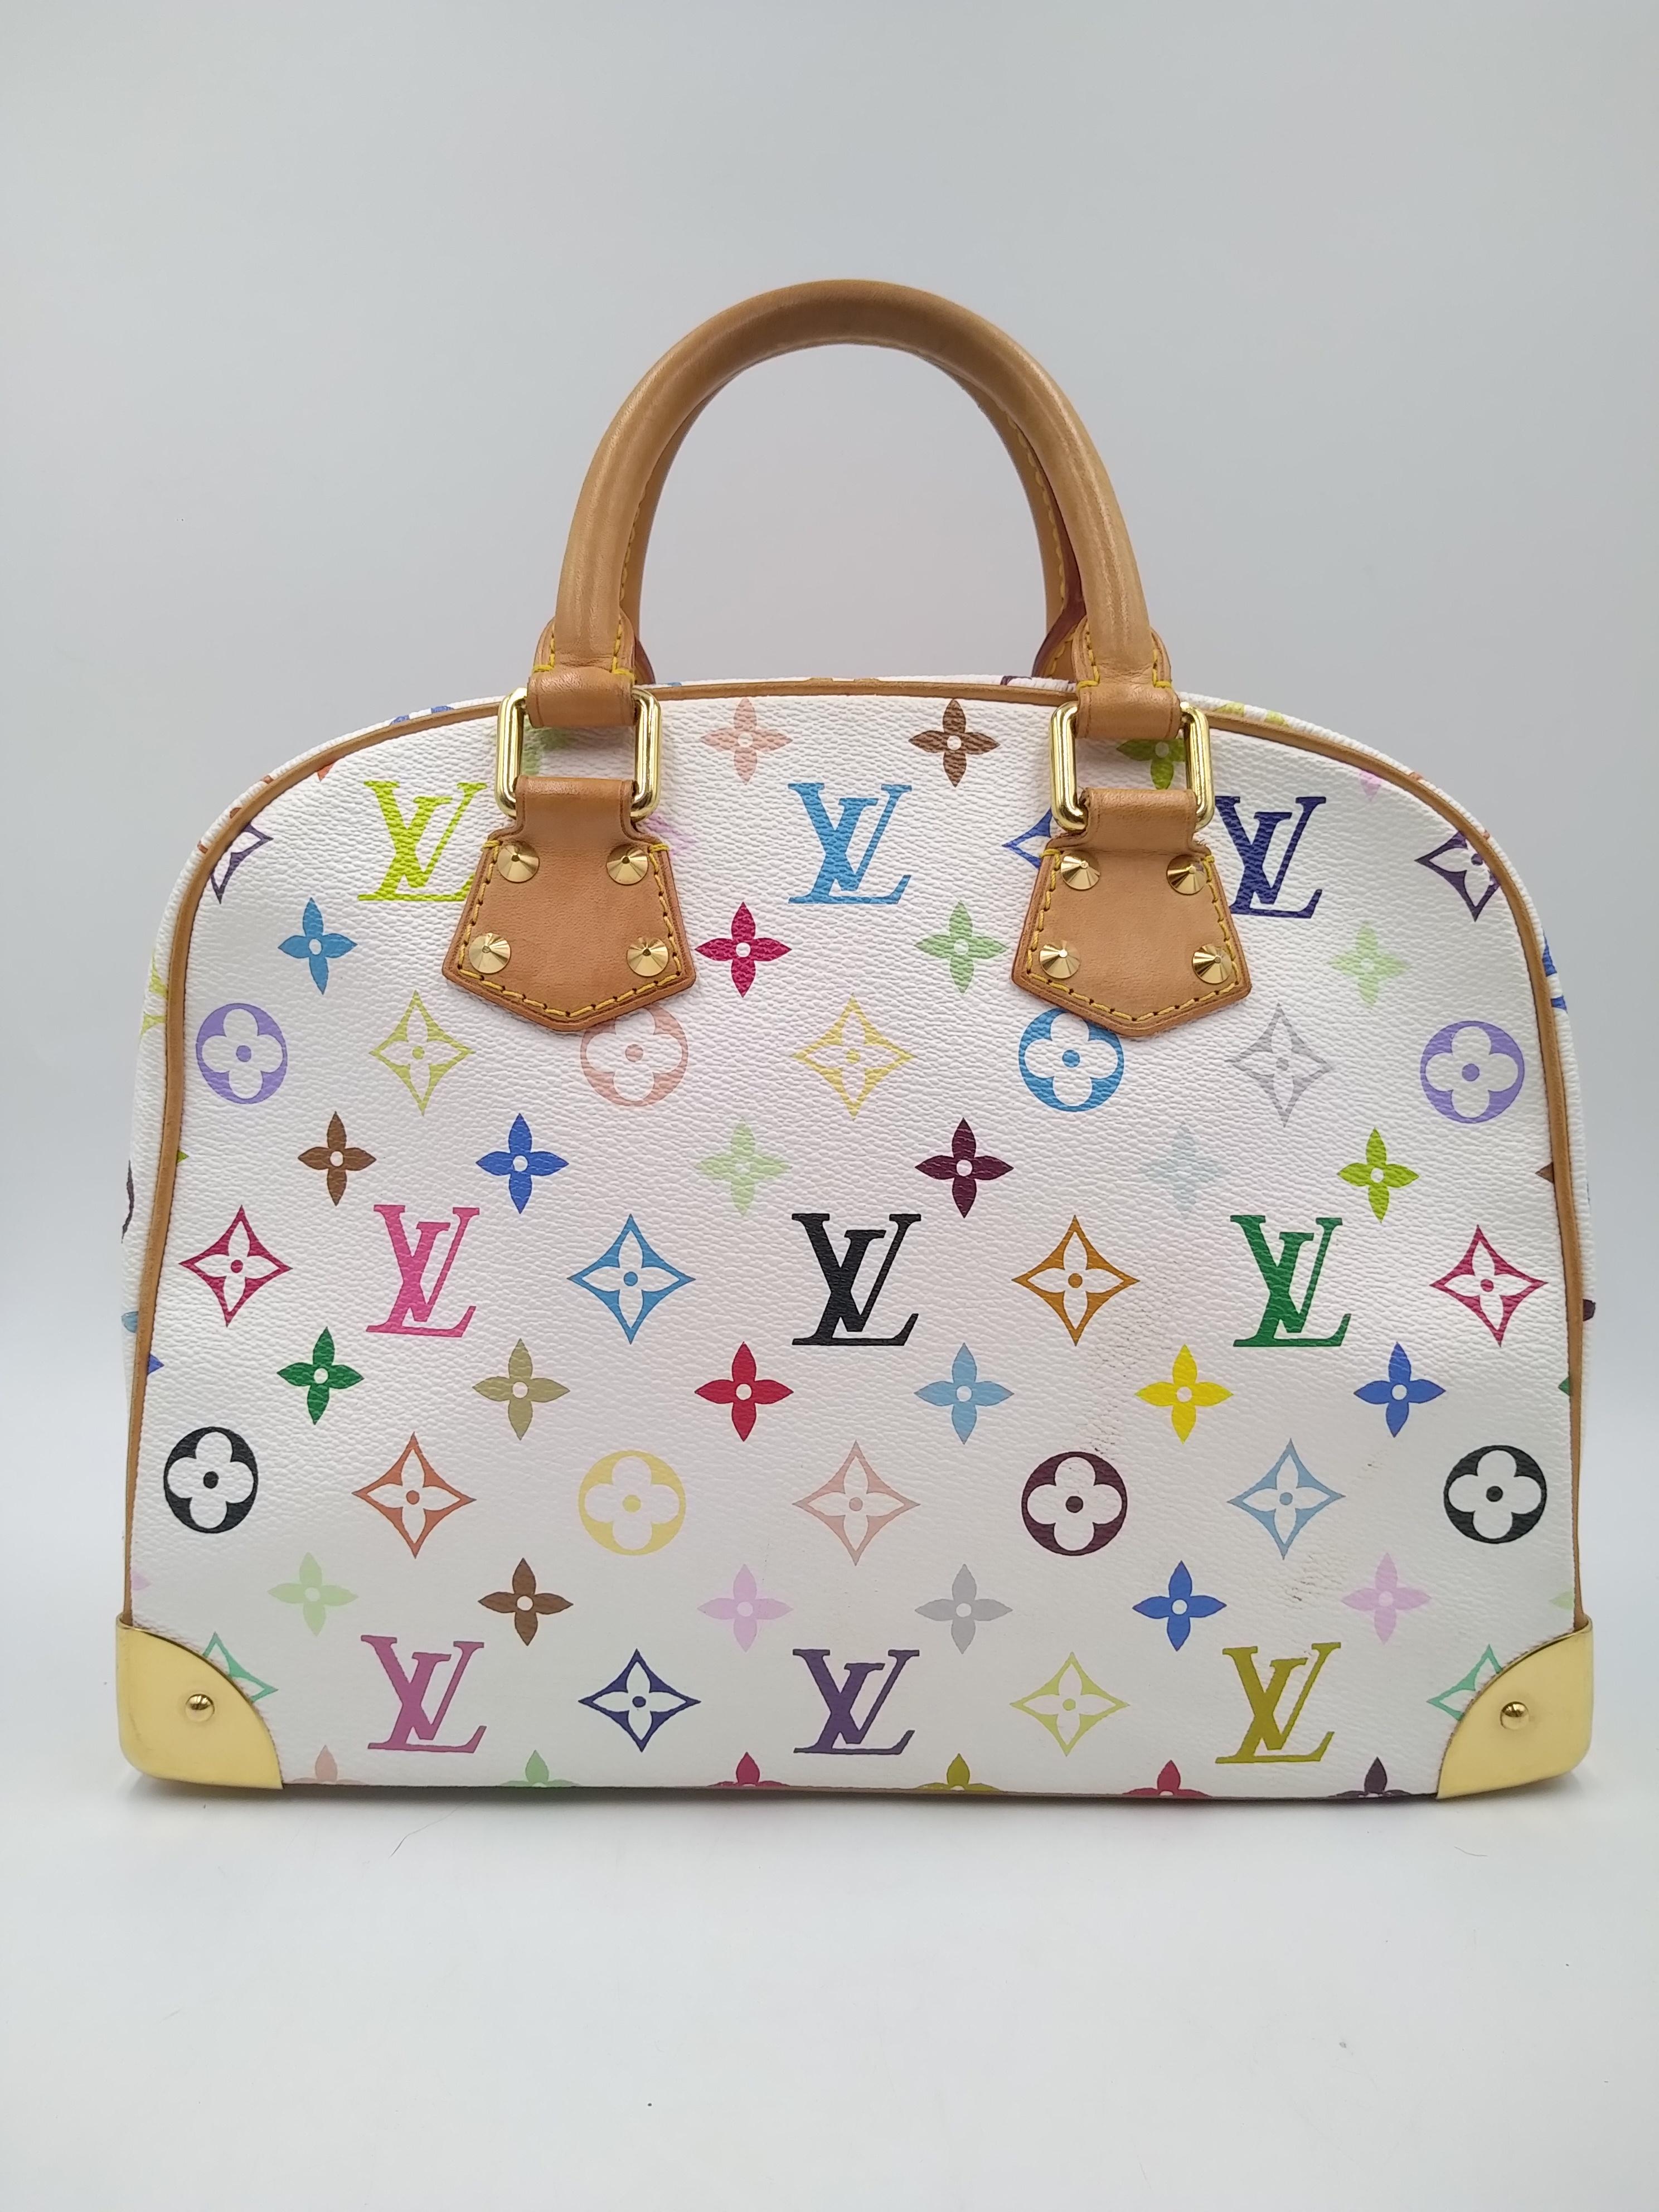 Louis Vuitton White Monogram Multicolor Trouville Bag, 2004.
The Louis Vuitton Monogram Multicolore collection is relatively new and was first introduced in spring 2003. Takashi Murakami decided to revamp the traditional monogram toile and give it a